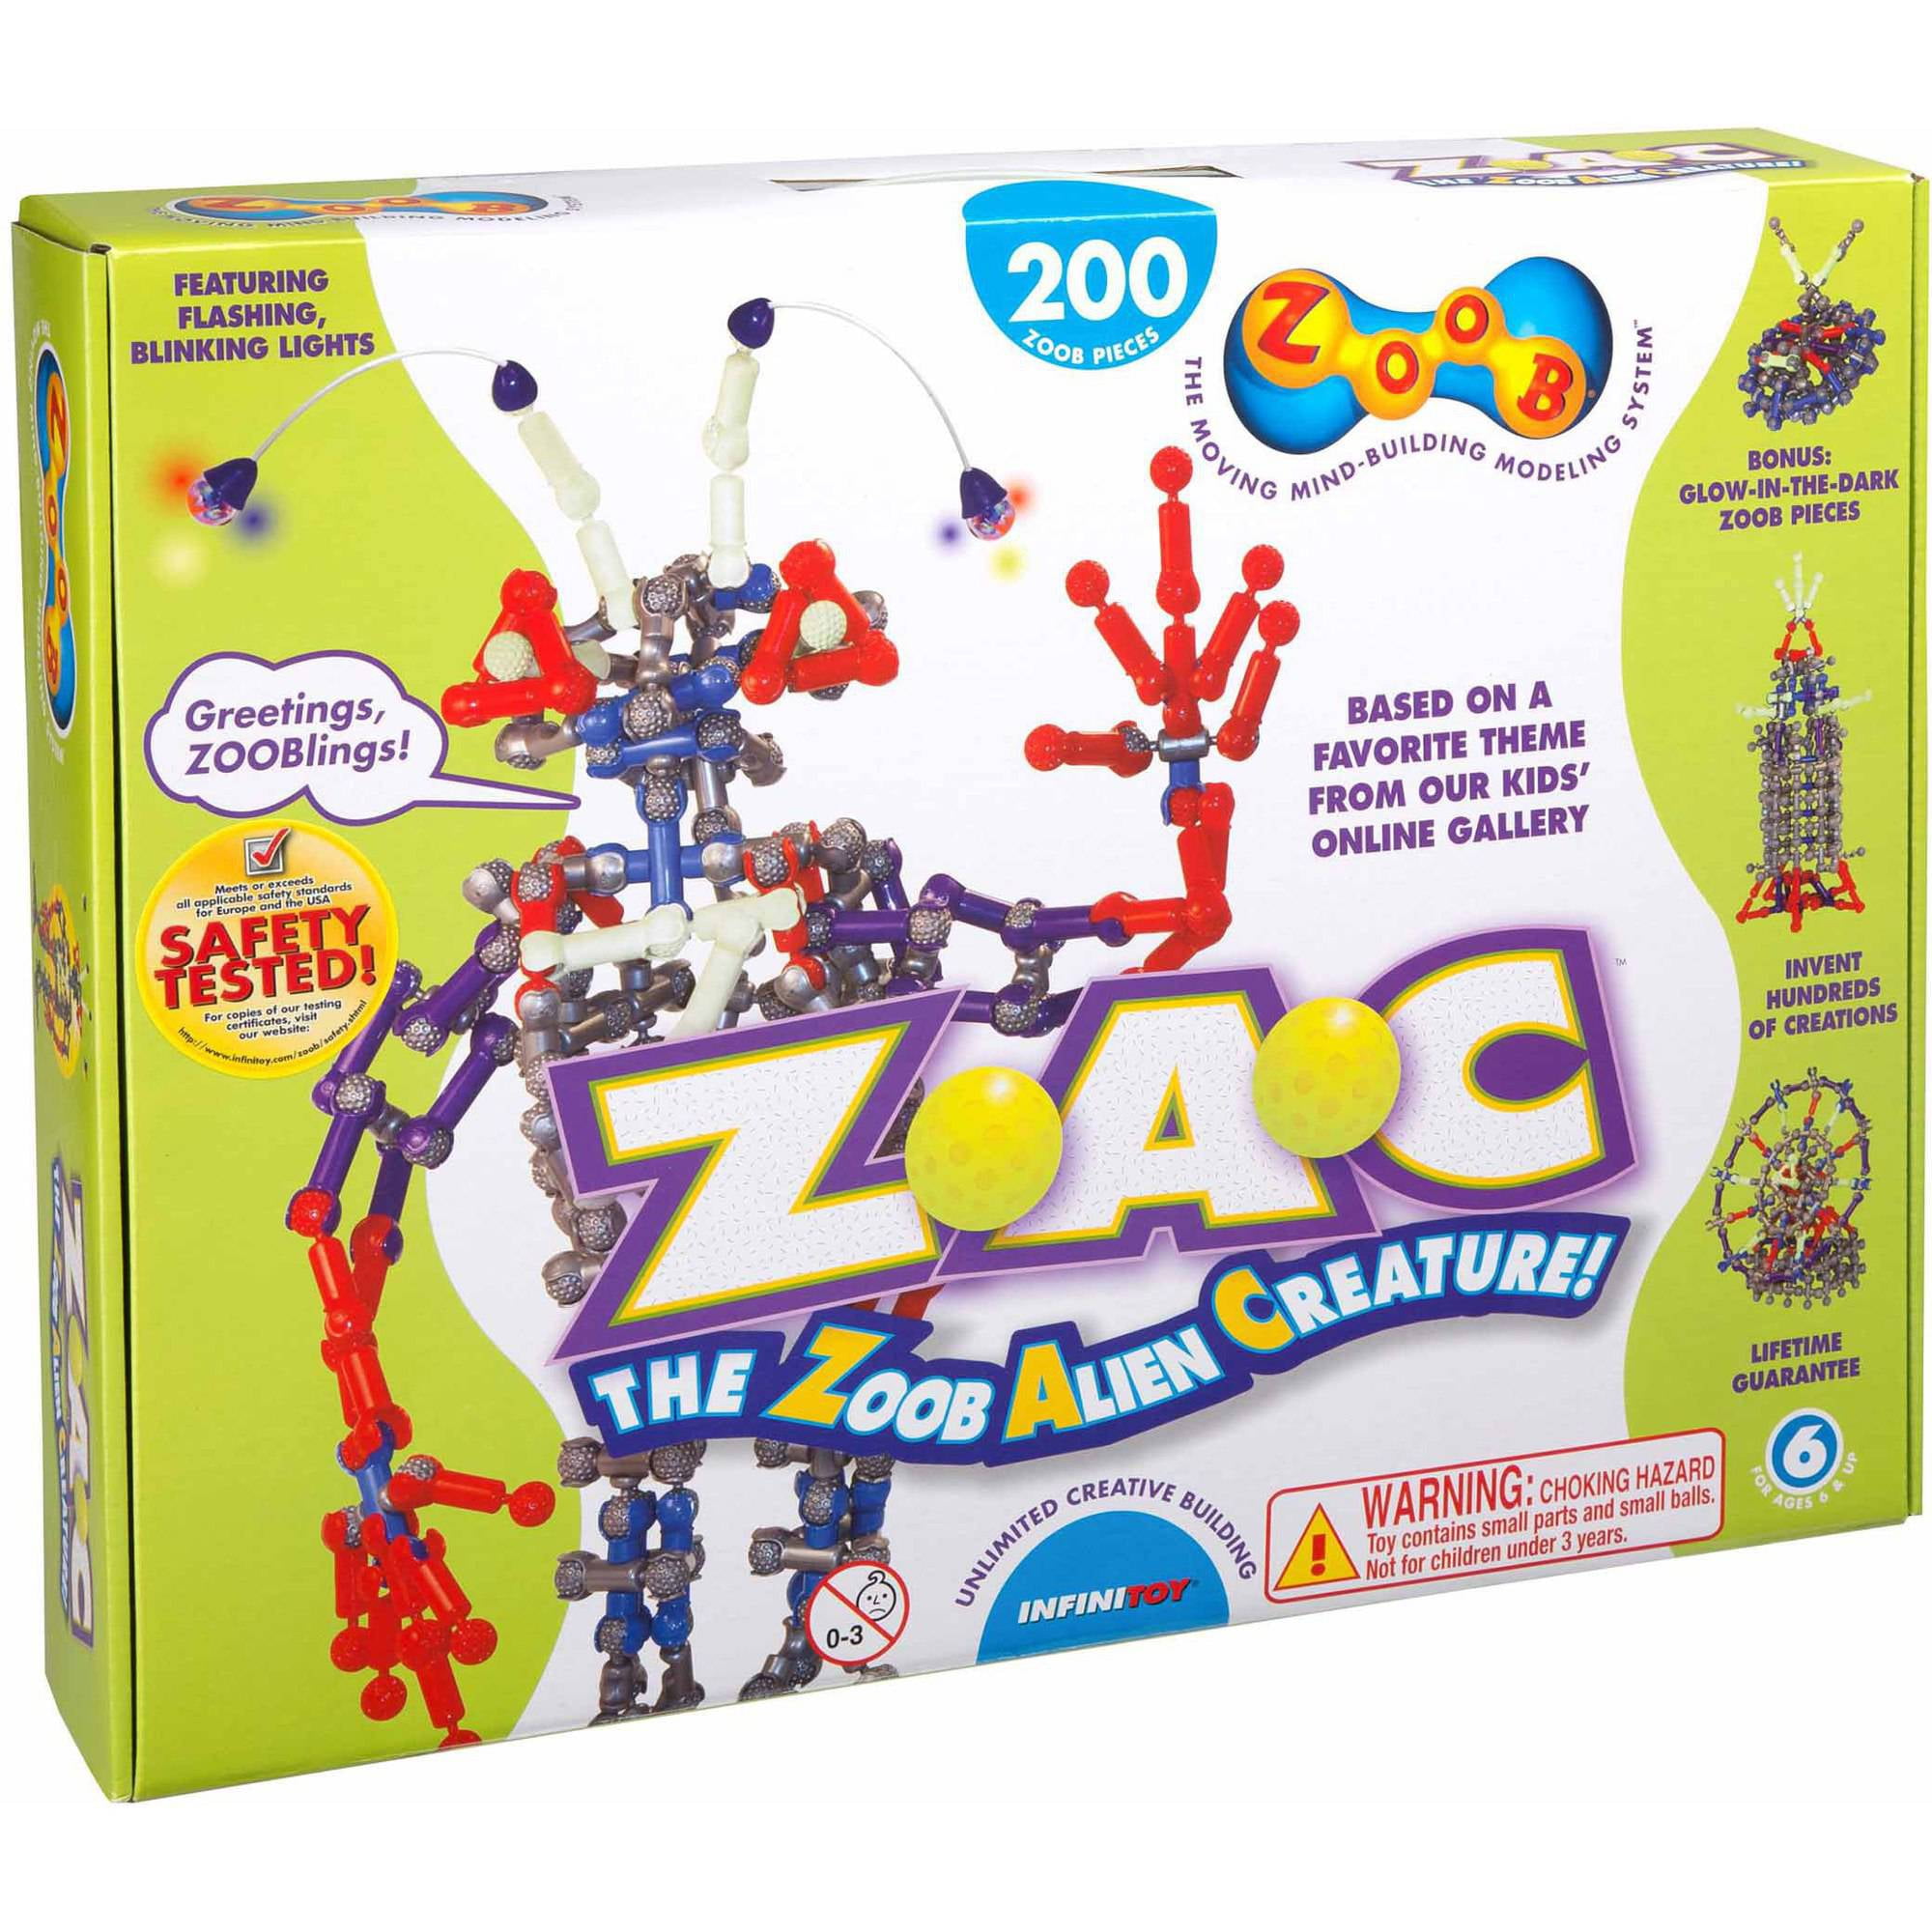 0Z11175 ZOOB S.T.E.M for sale online Challenge Toy Game 